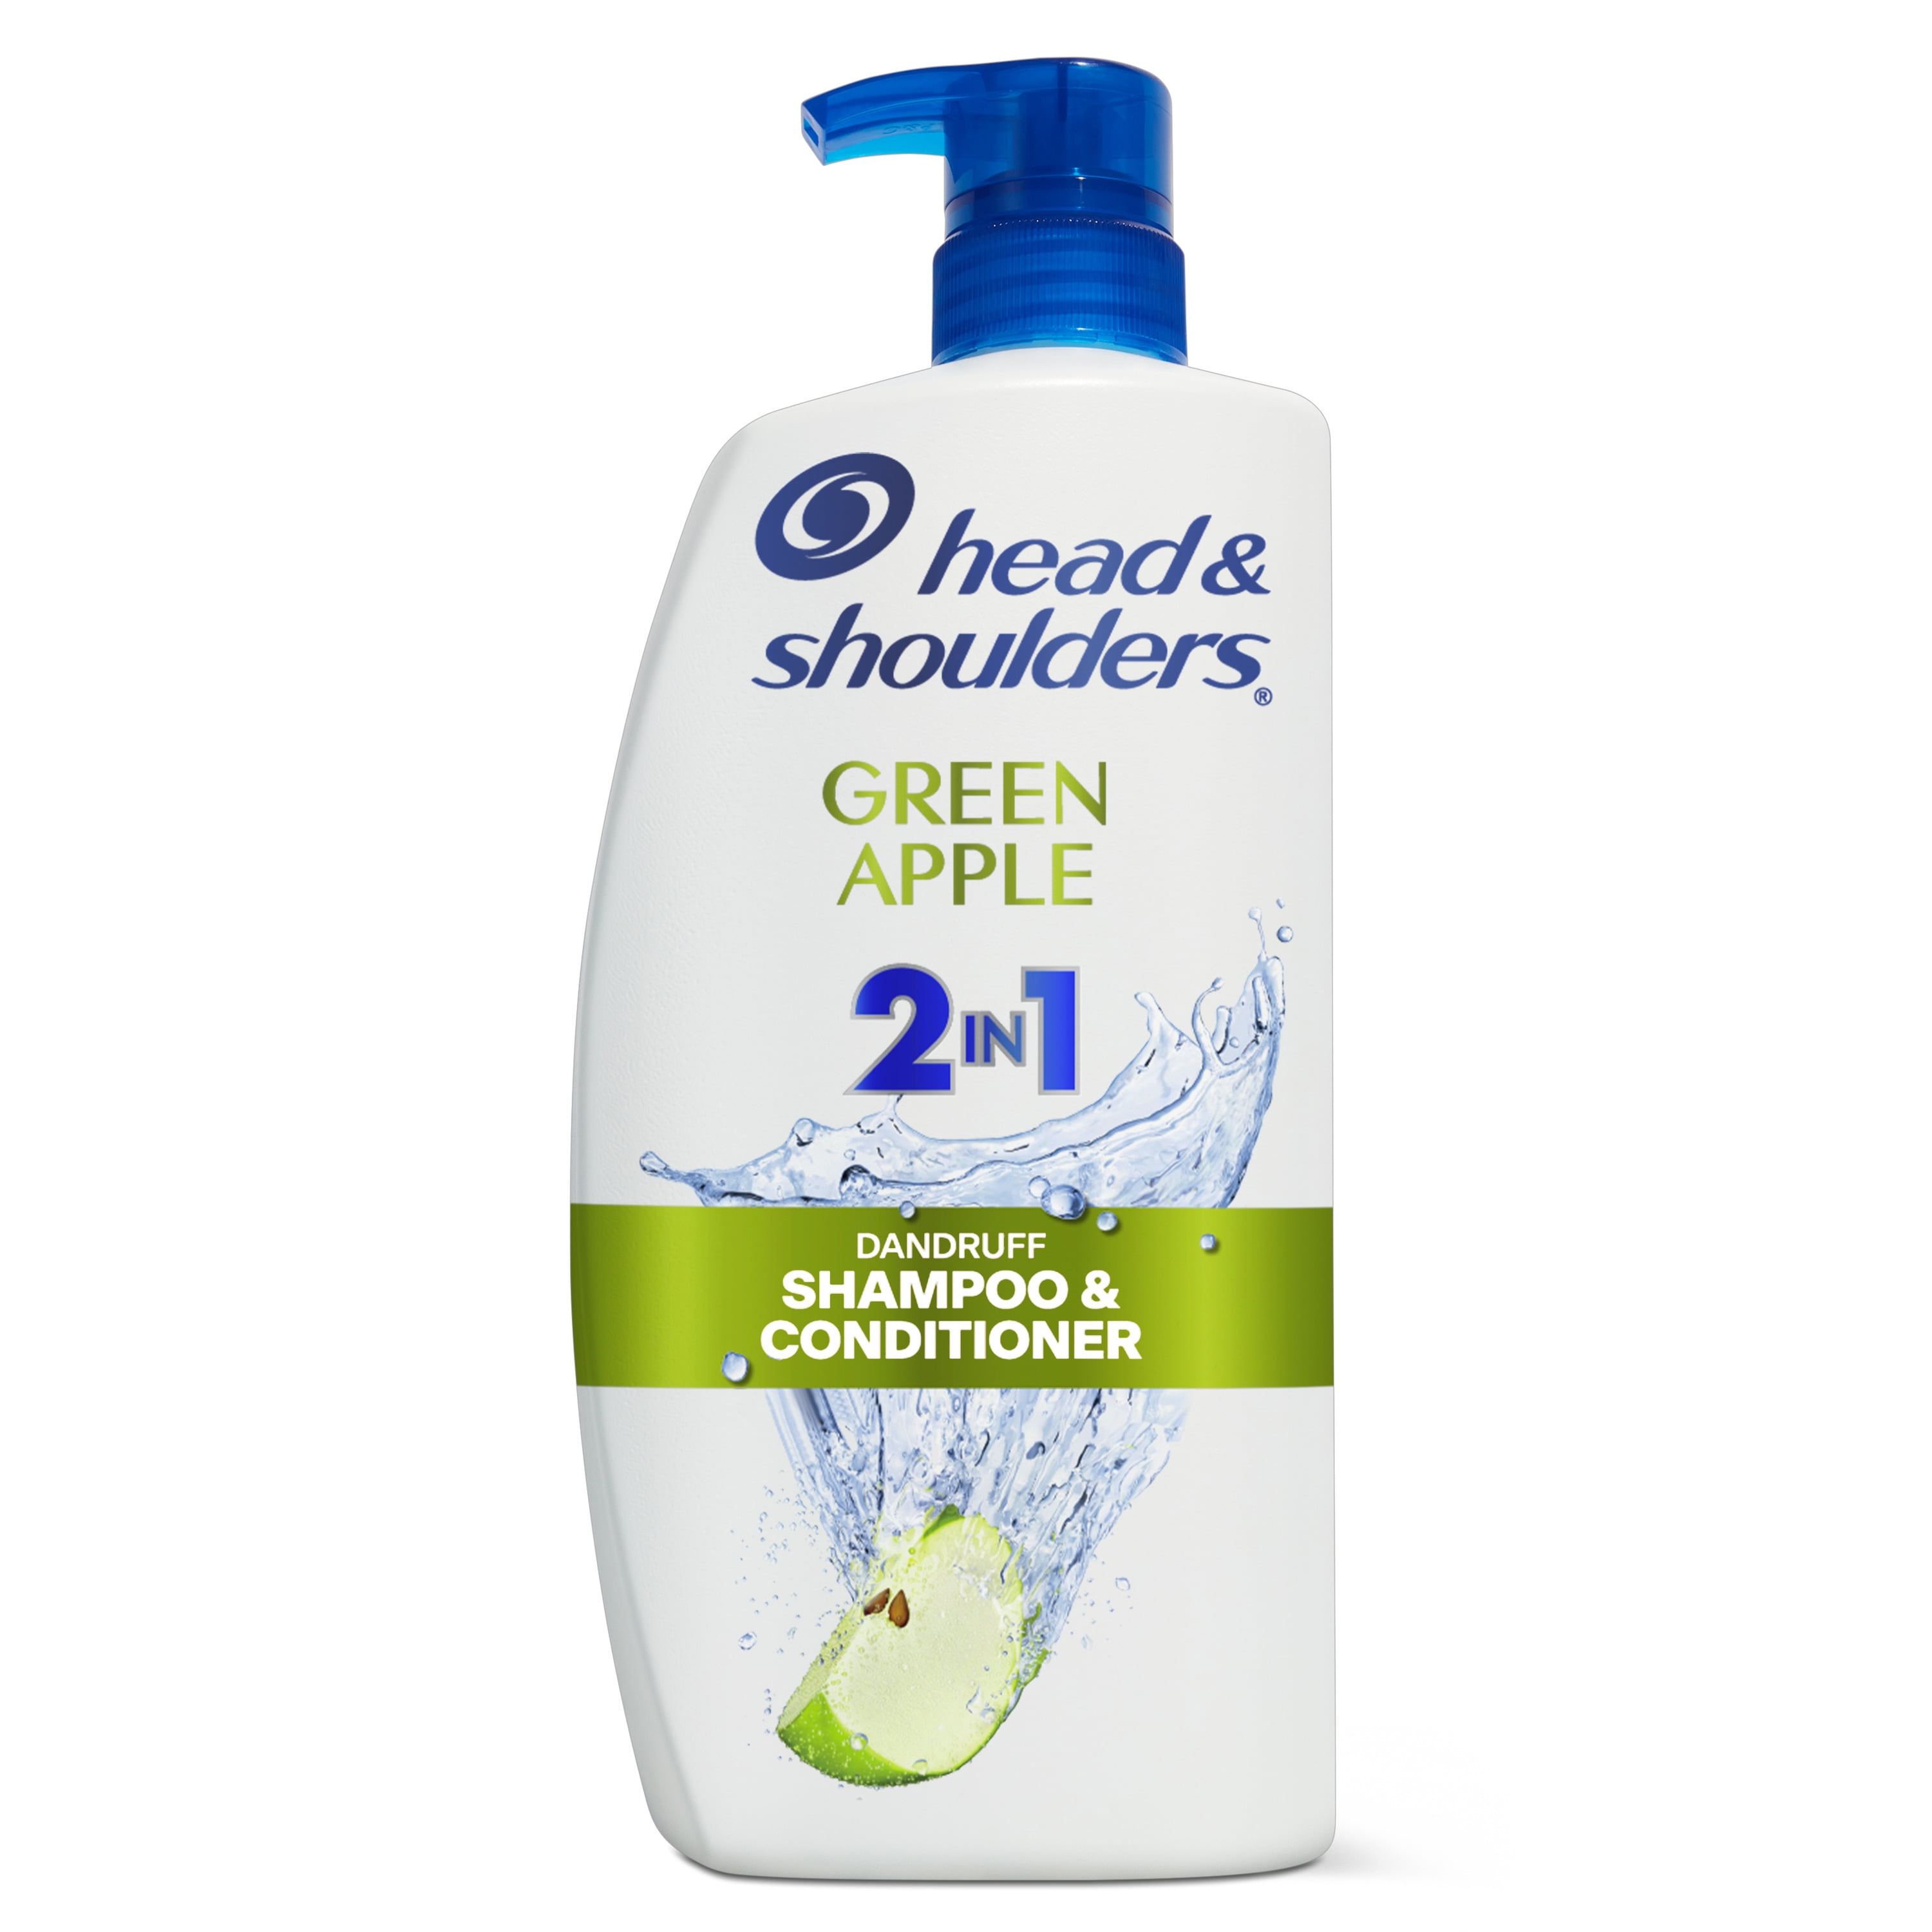 Head and Shoulders 2 in 1 Dandruff Shampoo and Conditioner, Green Apple, 28.2 oz